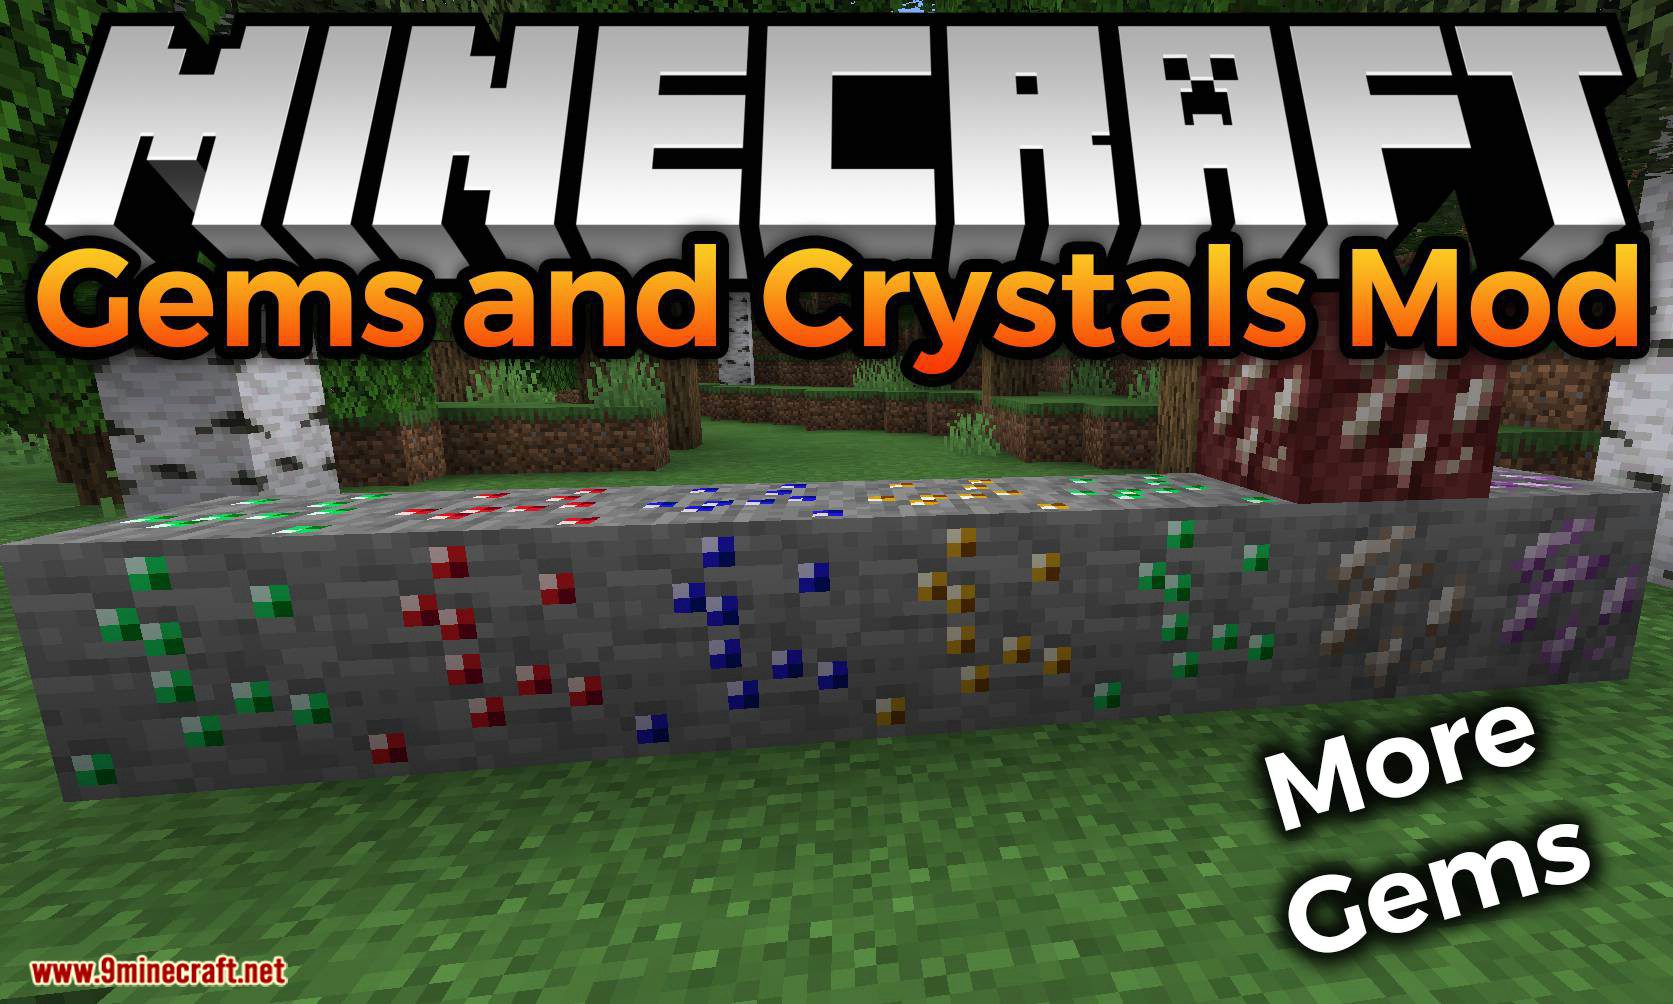 Gems and Crystals Mod for minecraft logo